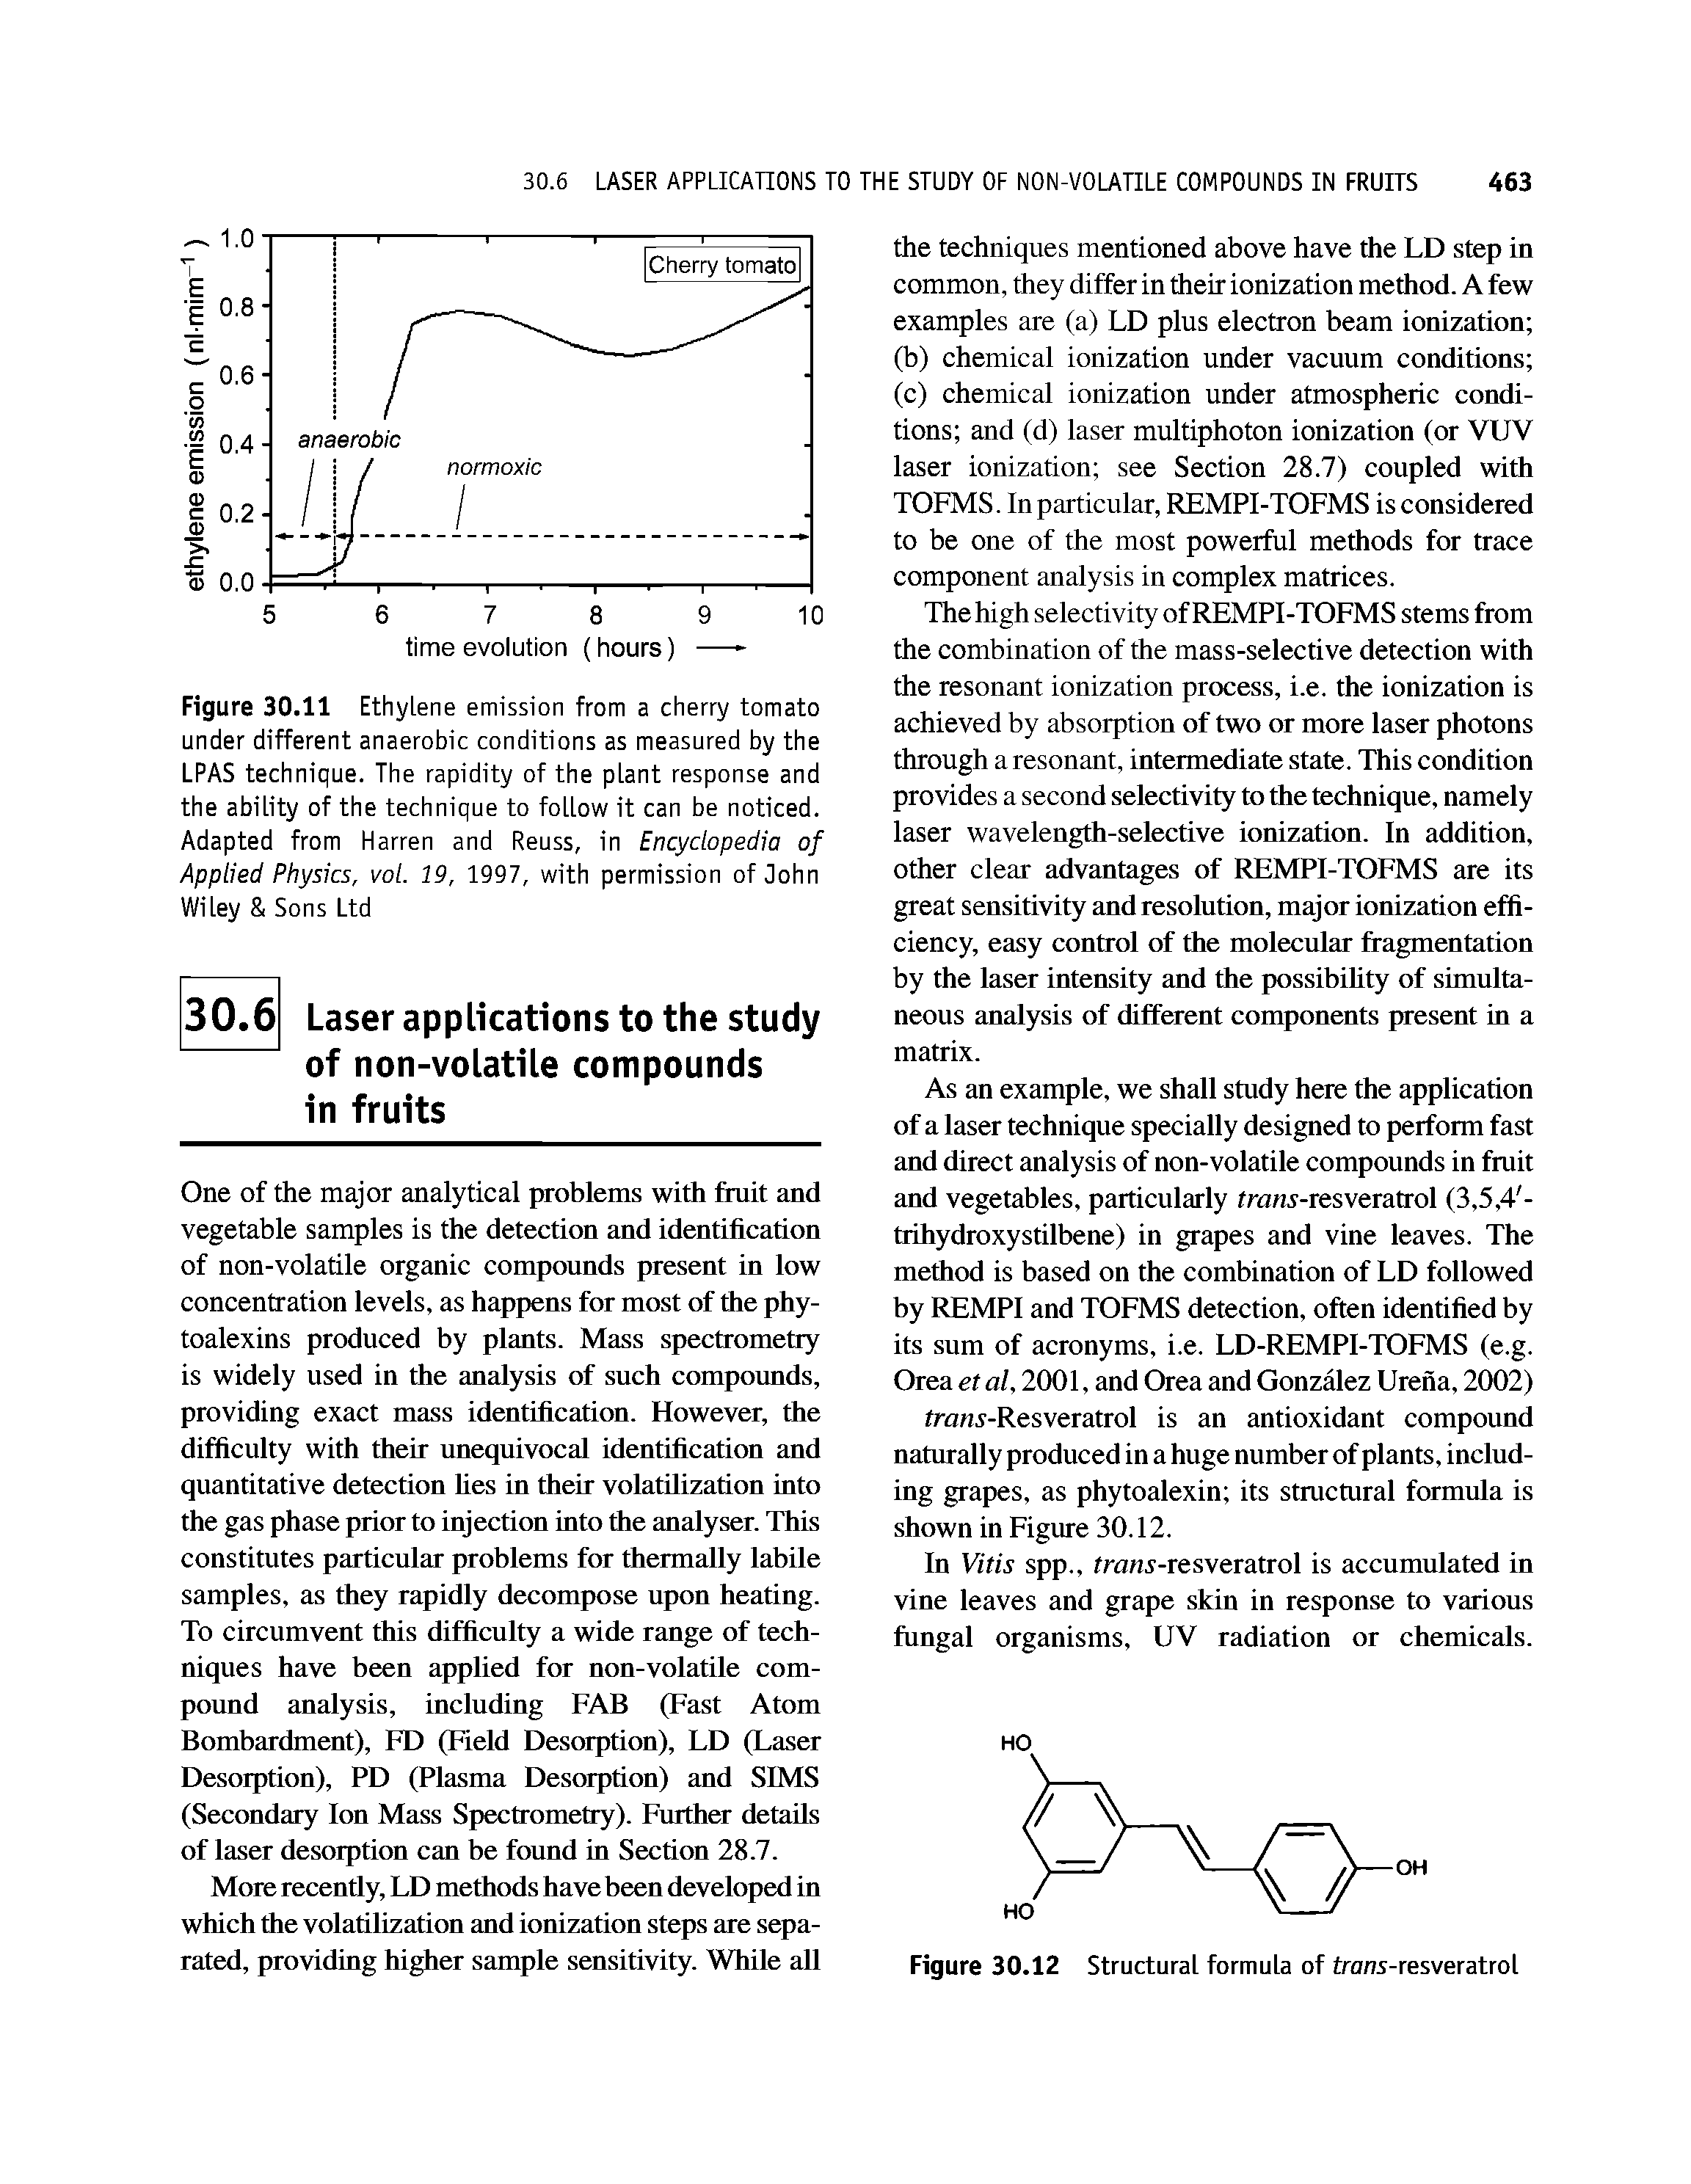 Figure 30.11 Ethylene emission from a cherry tomato under different anaerobic conditions as measured by the LPAS technique. The rapidity of the plant response and the ability of the technique to follow it can be noticed. Adapted from Harren and Reuss, in Encydopedia of Applied Physics, vol. 19, 1997, with permission of John Wiley Sons Ltd...